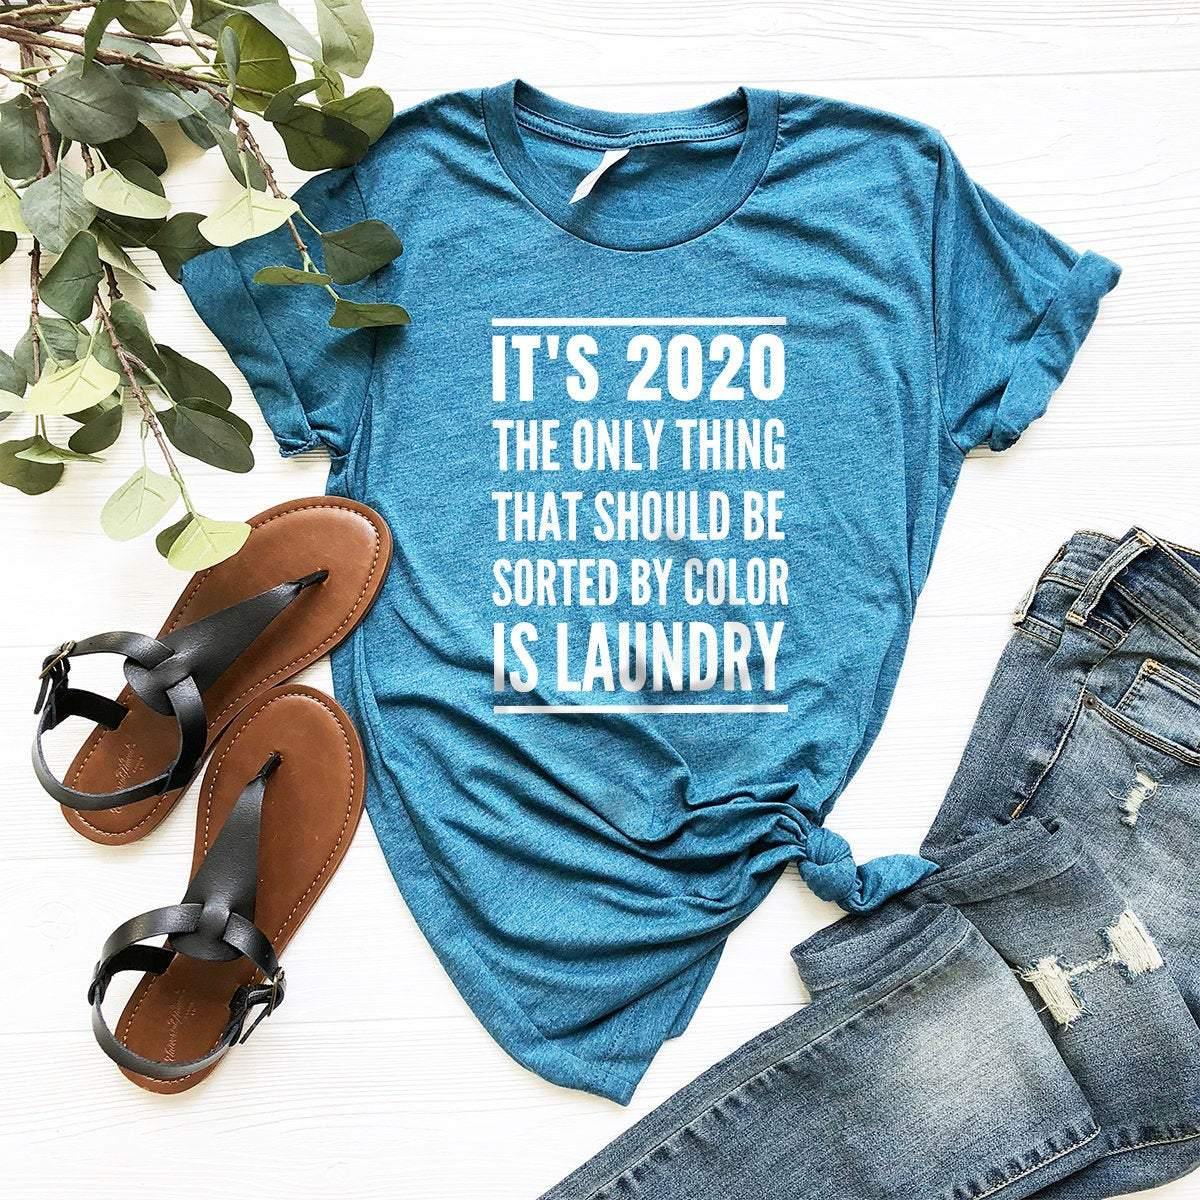 Black Culture Shirt, Black Power T-Shirt, Black Lives Matter Tee, It's 2020 The Only Thing That Should Be Sorted By Color Is Laundry Tee - Fastdeliverytees.com